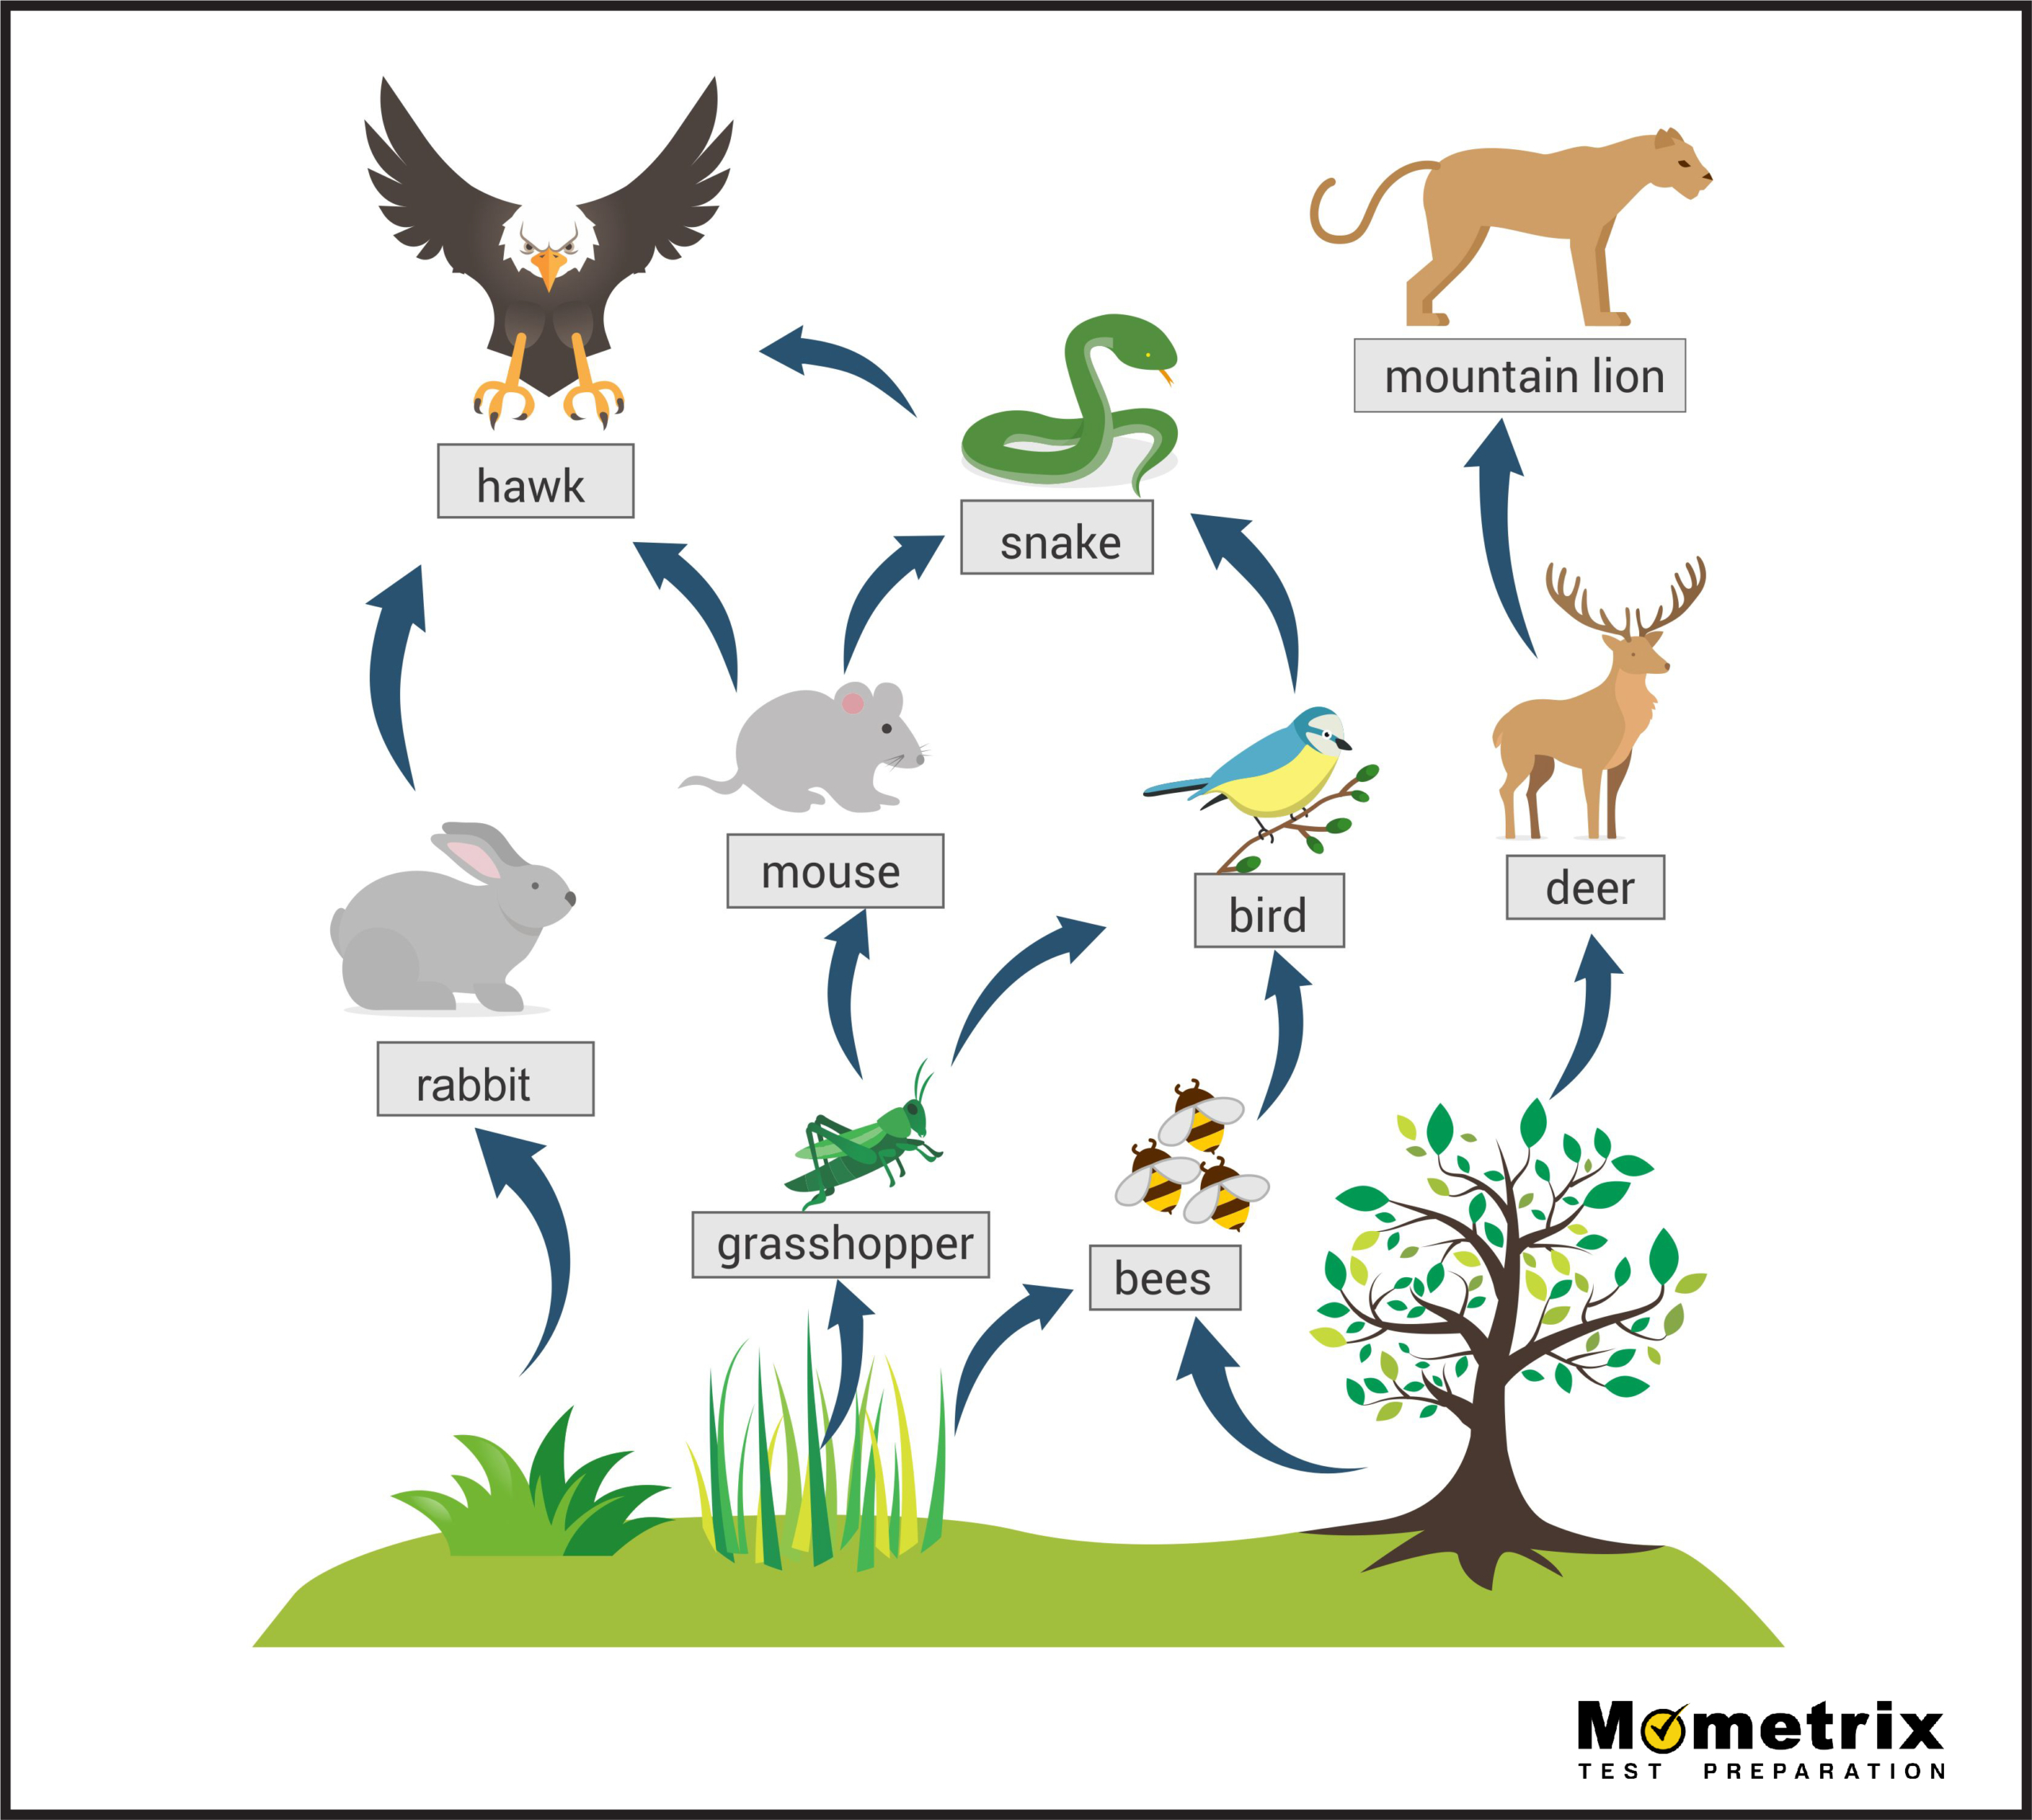 <p>What are the producers of this food web?</p>